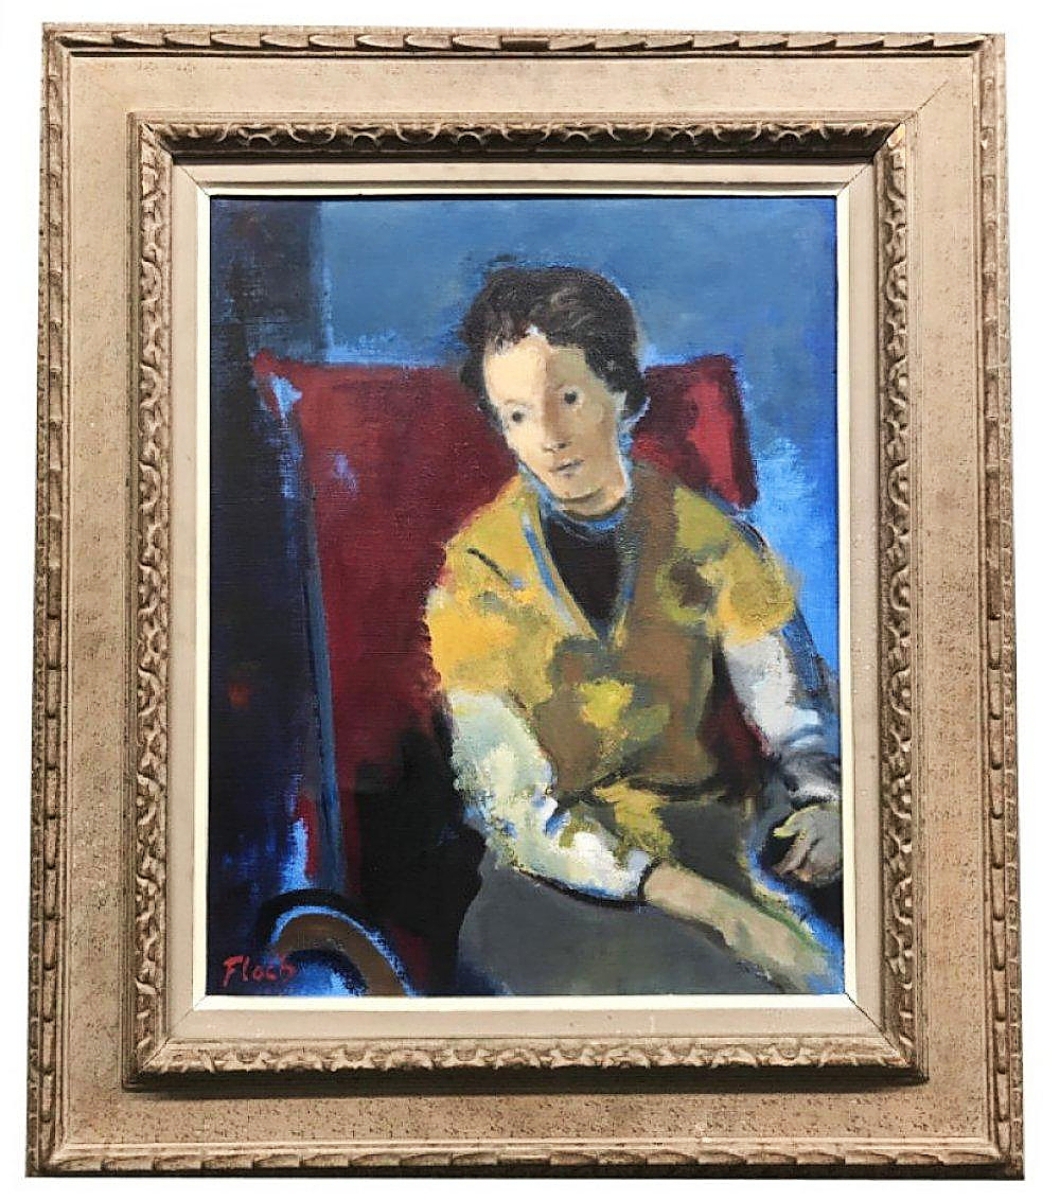 Joseph Floch’s oil on canvas portrait of a seated girl measured 20 by 16 inches and retained a label from the Forum Gallery. It made $10,200 from a buyer in the United States ($1,5/2,500).